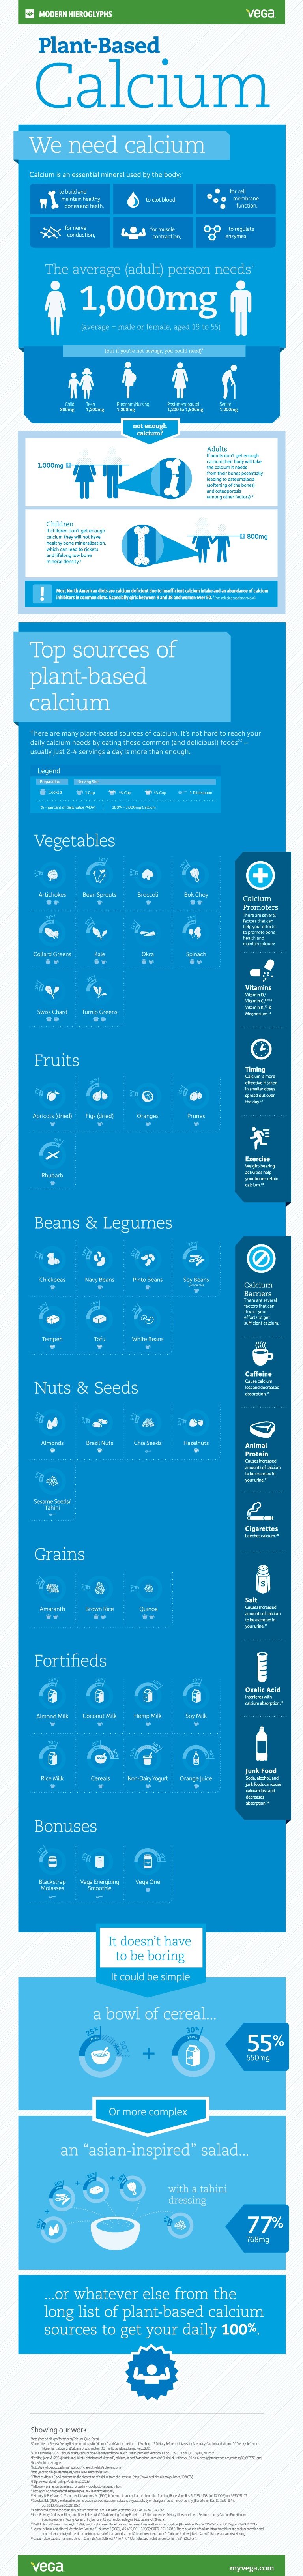 Need More Calcium- Try These Plant-Based Sources Infographic